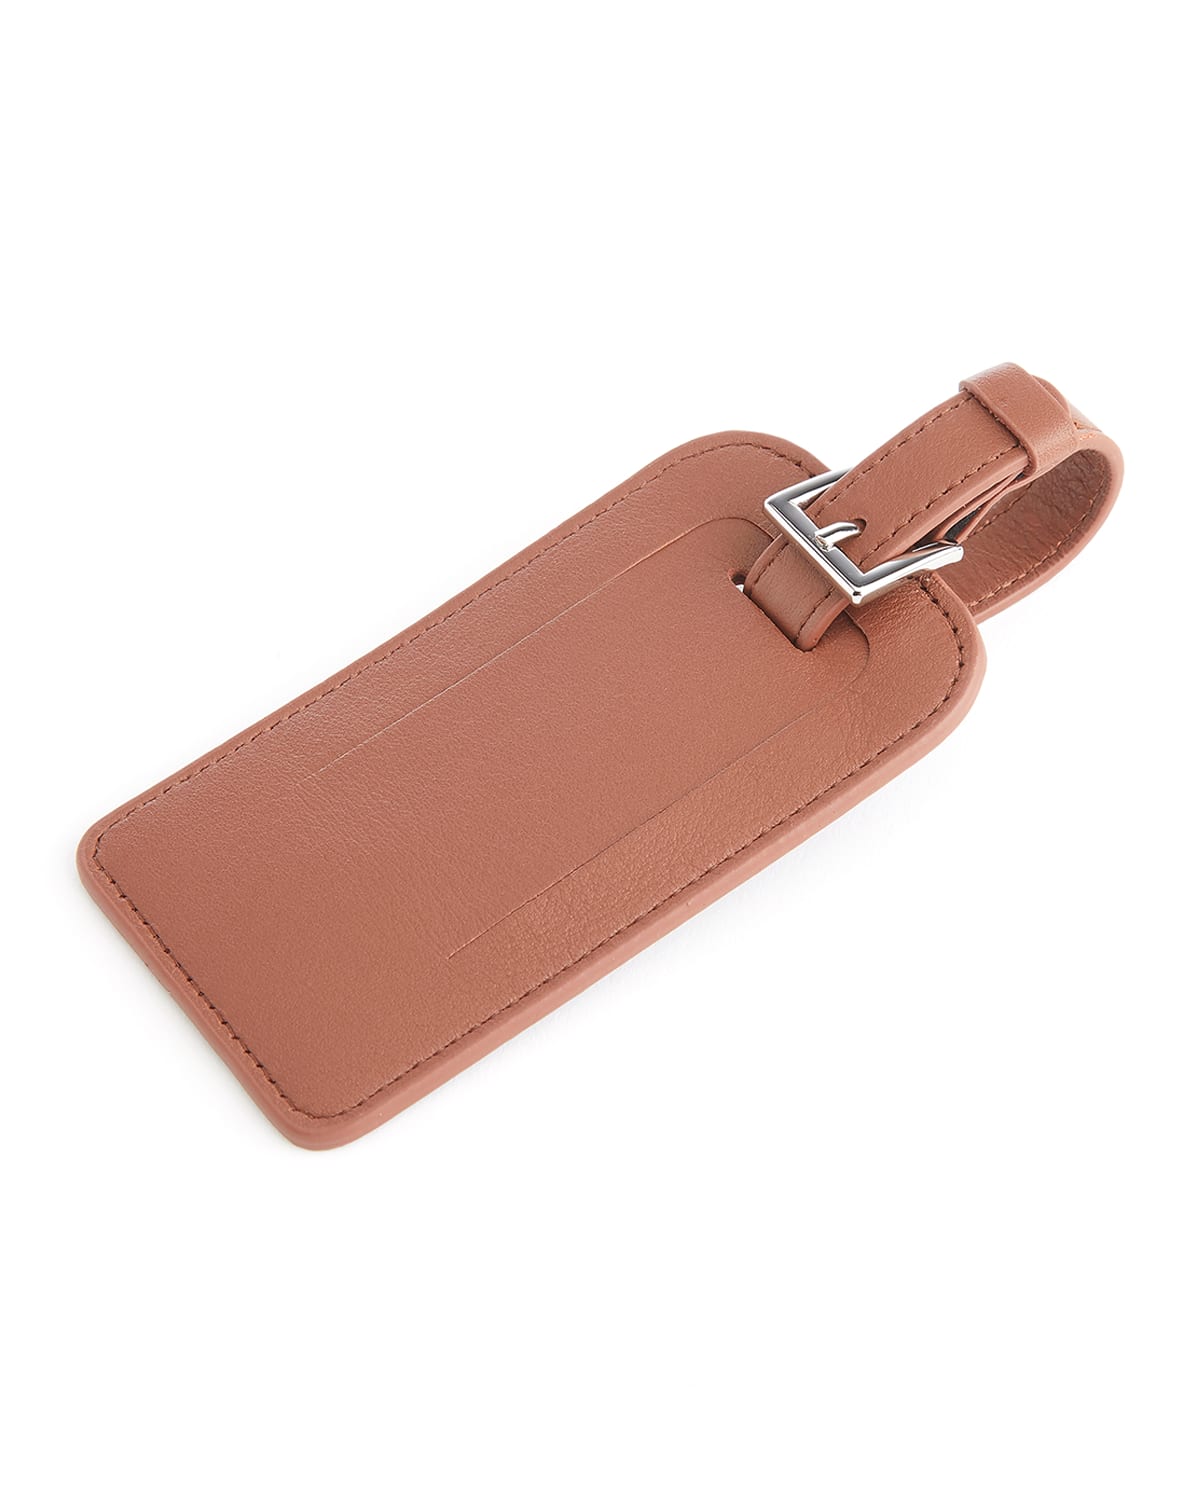 Royce New York Leather Luggage Tag With Silver Hardware In Tan